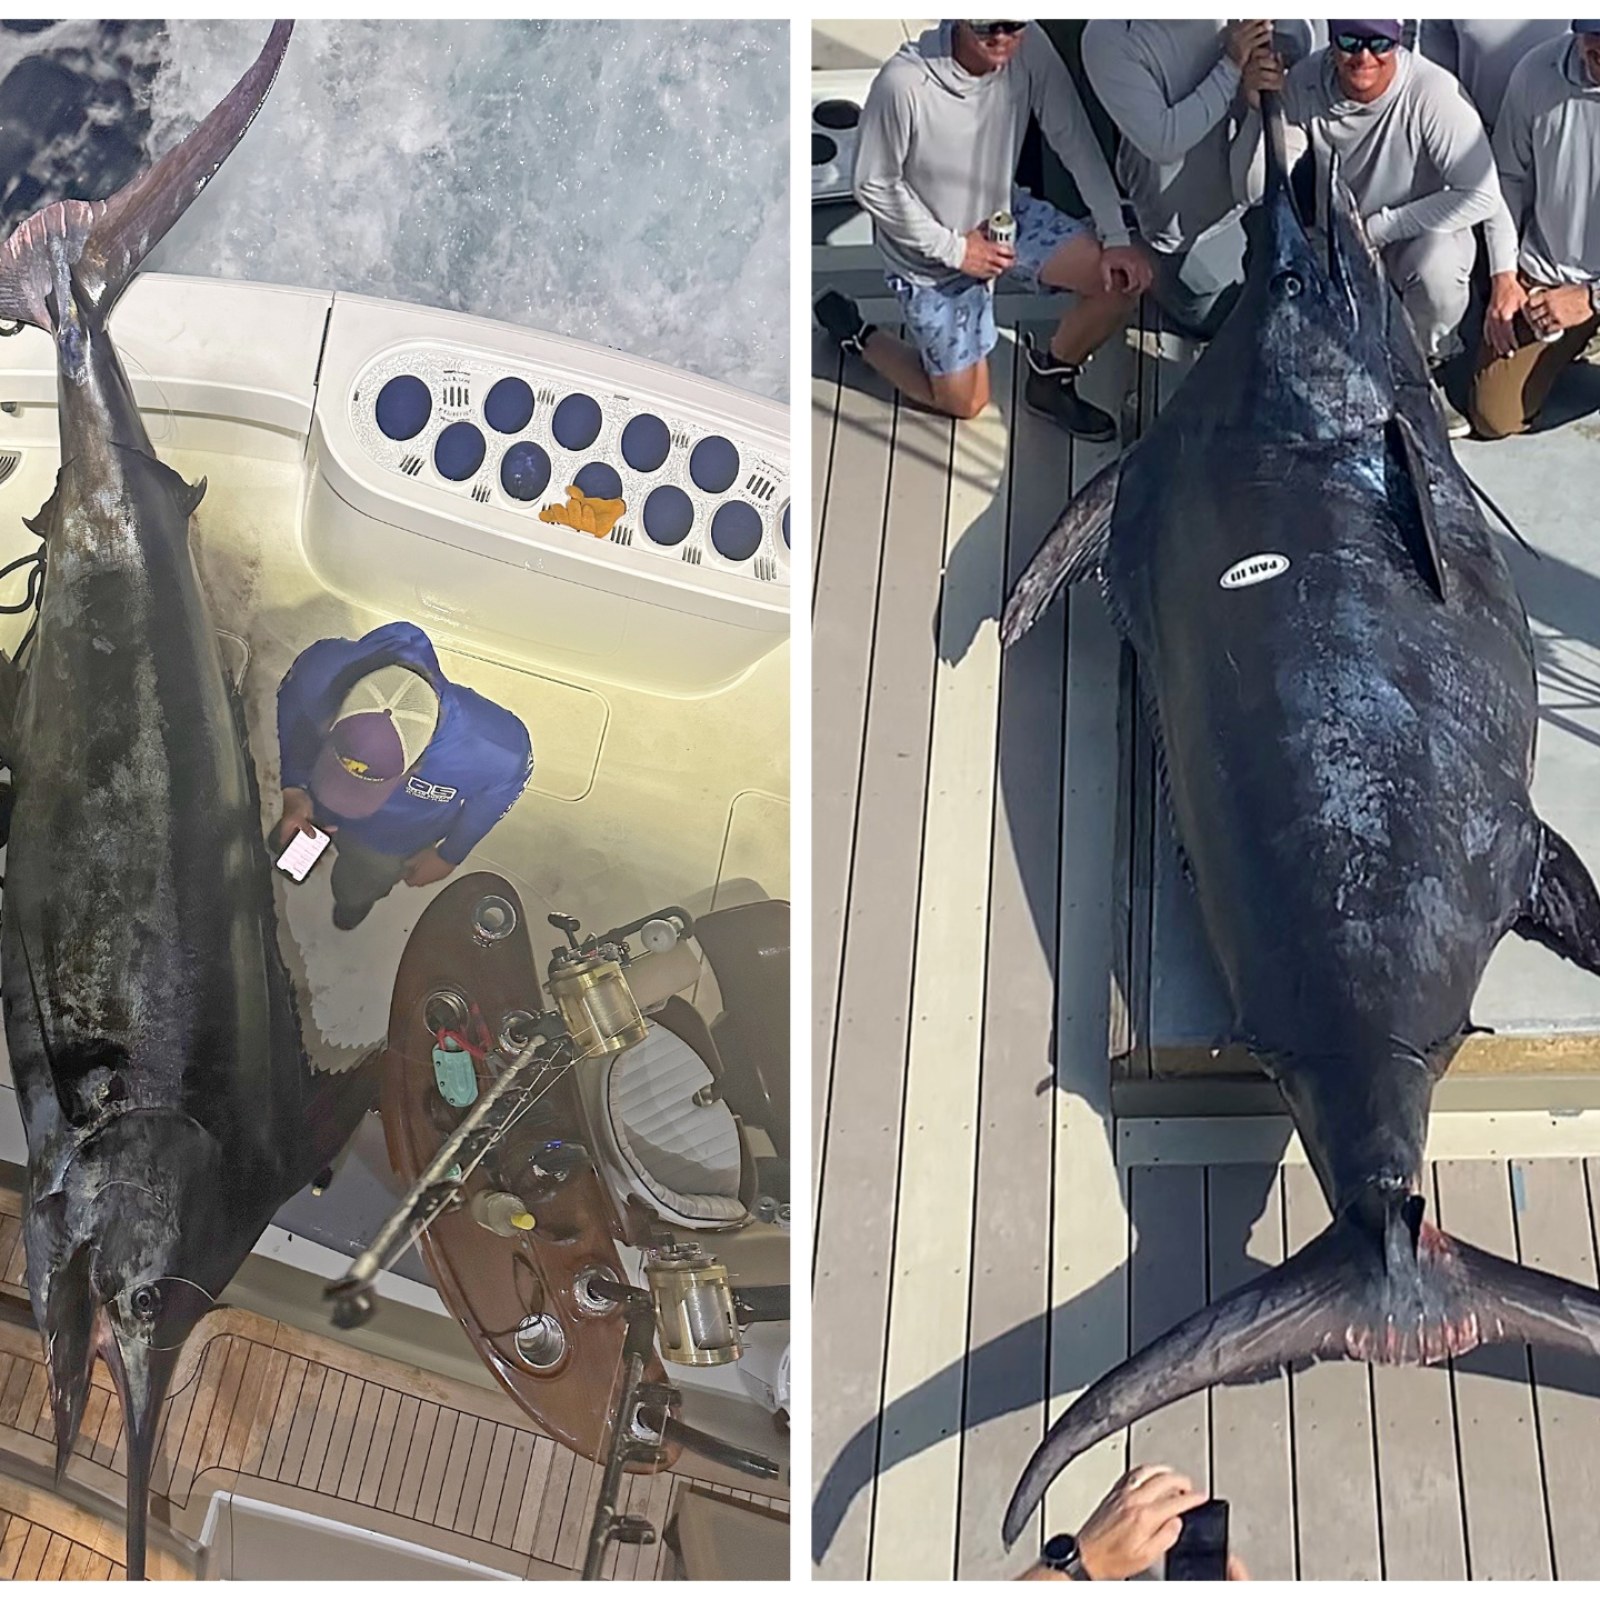 Fishermen Catch Huge Blue Marlin Weighing Over 1,000lbs in Gulf of